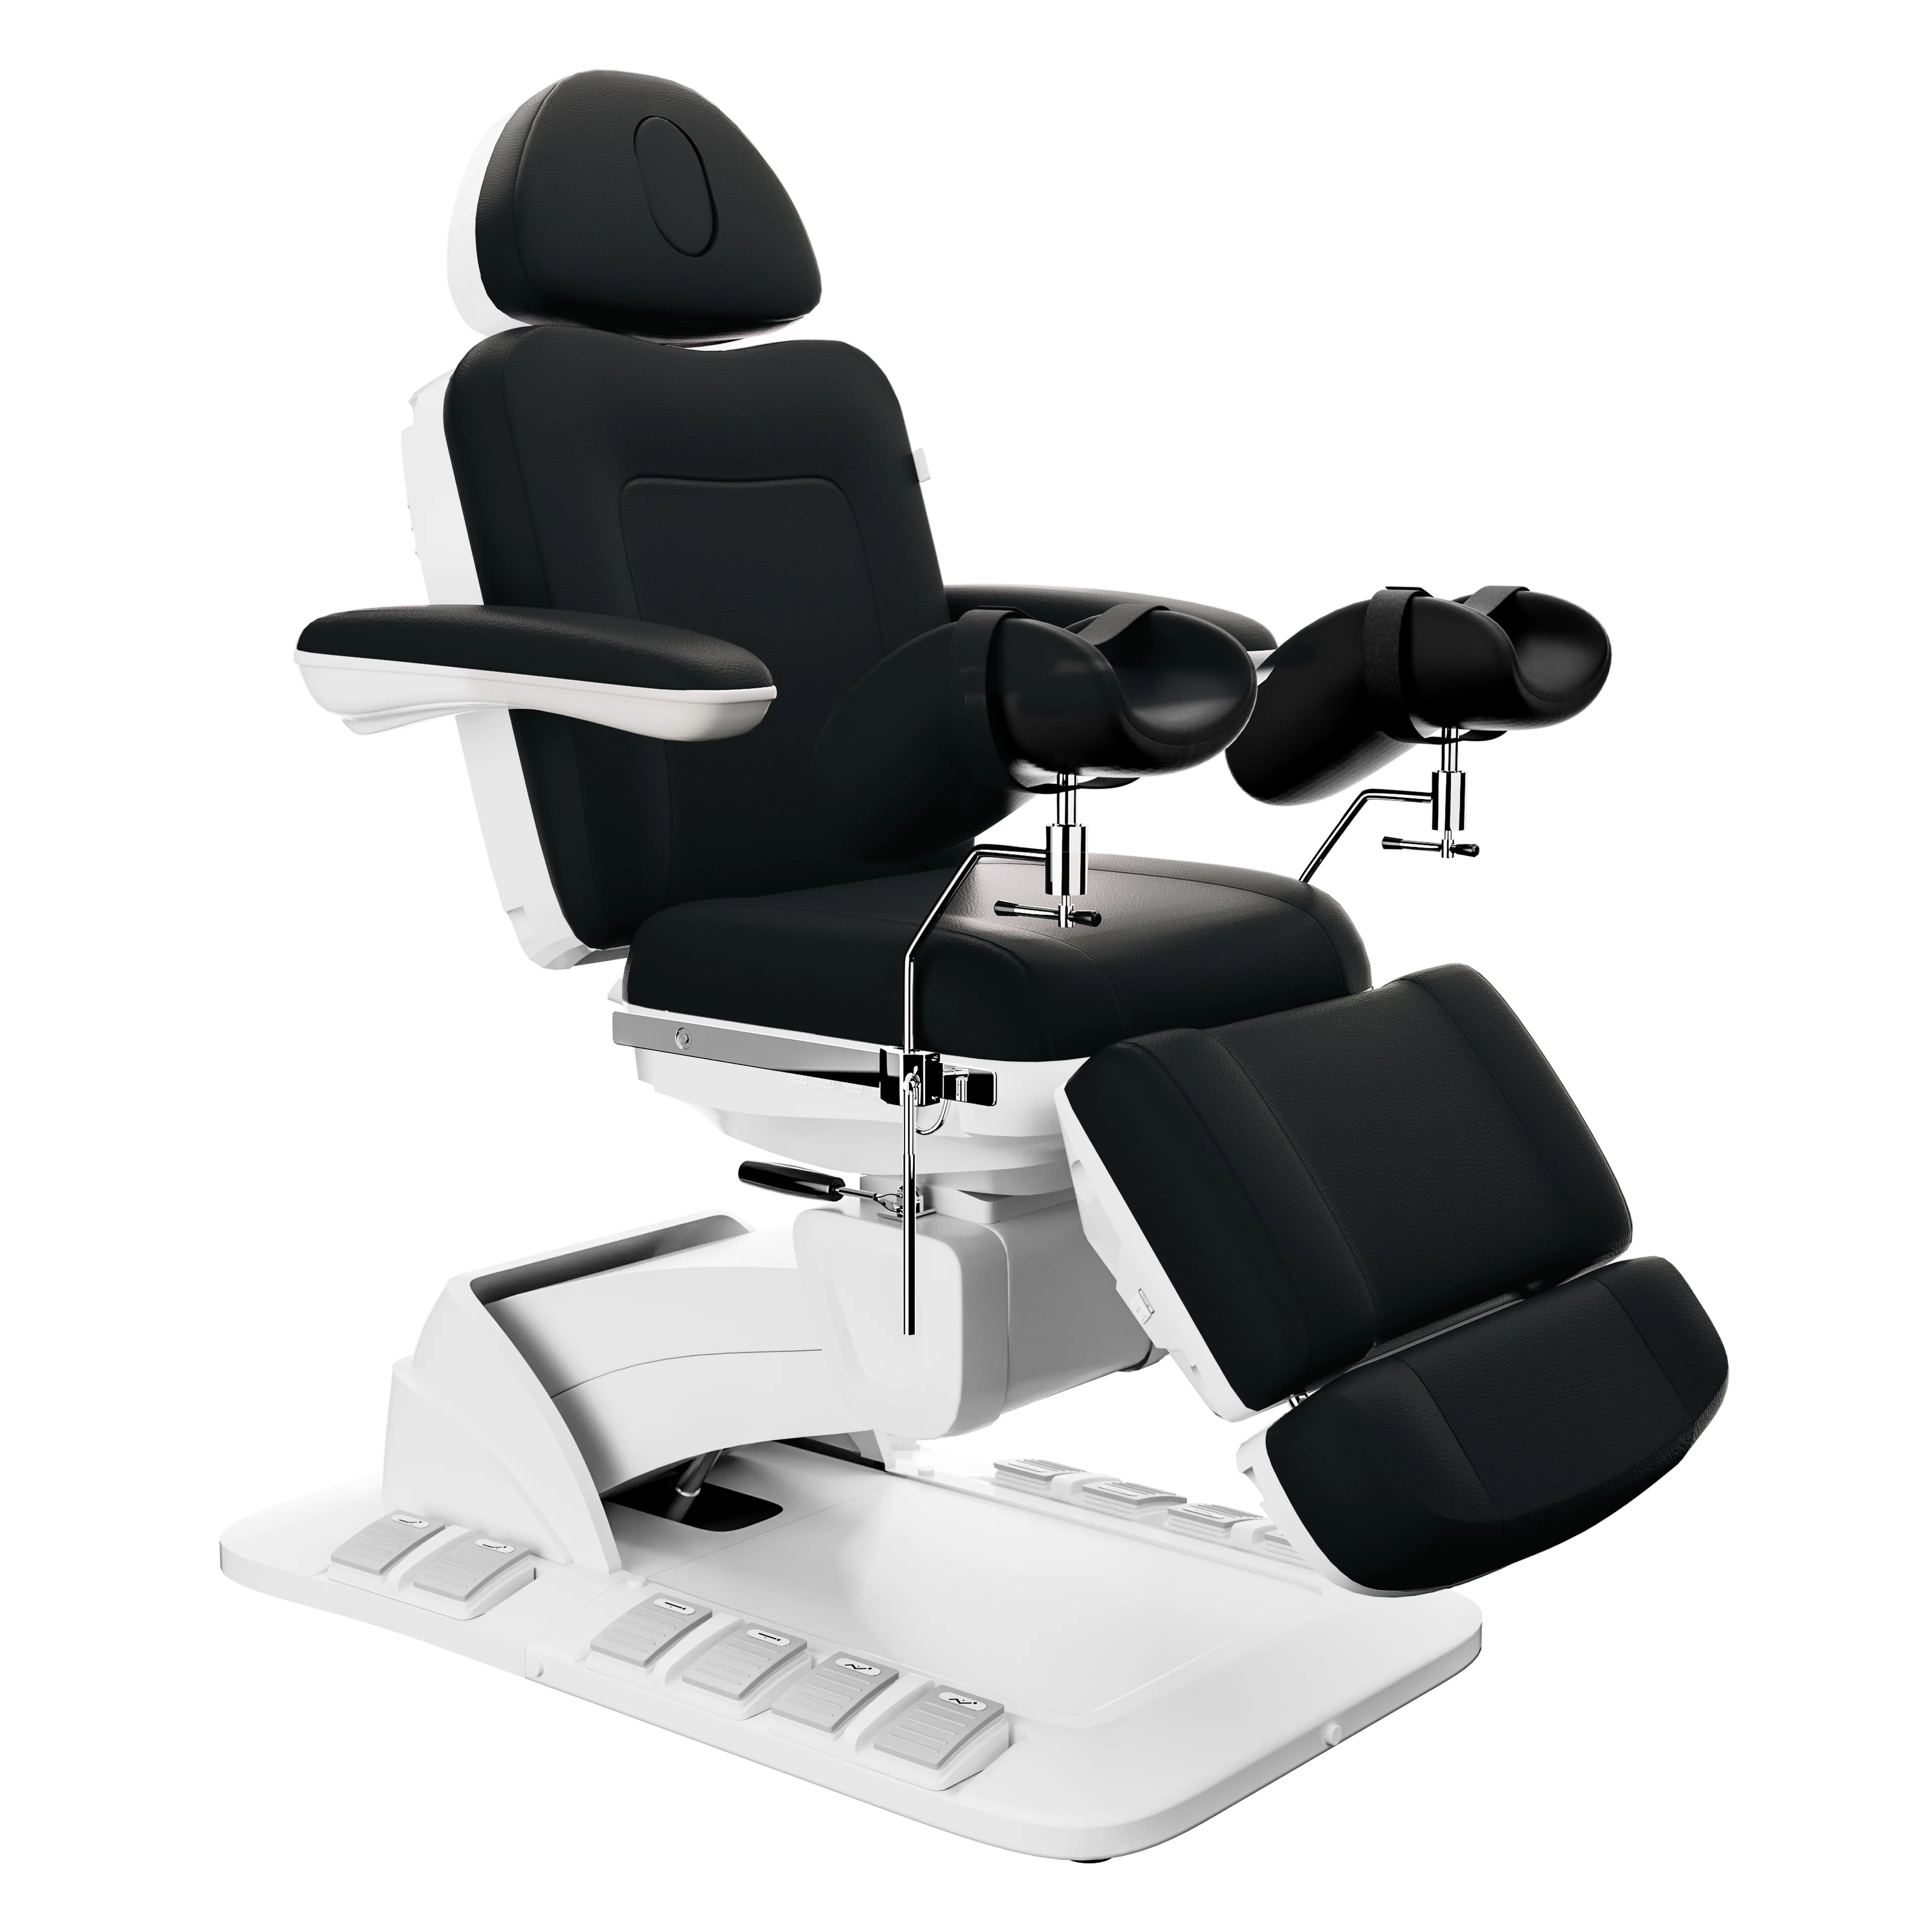 SpaMarc . Novato (OBGYN & Gynecology) . Stirrups . Rotating . 4 Motor Spa Treatment Chair/Bed